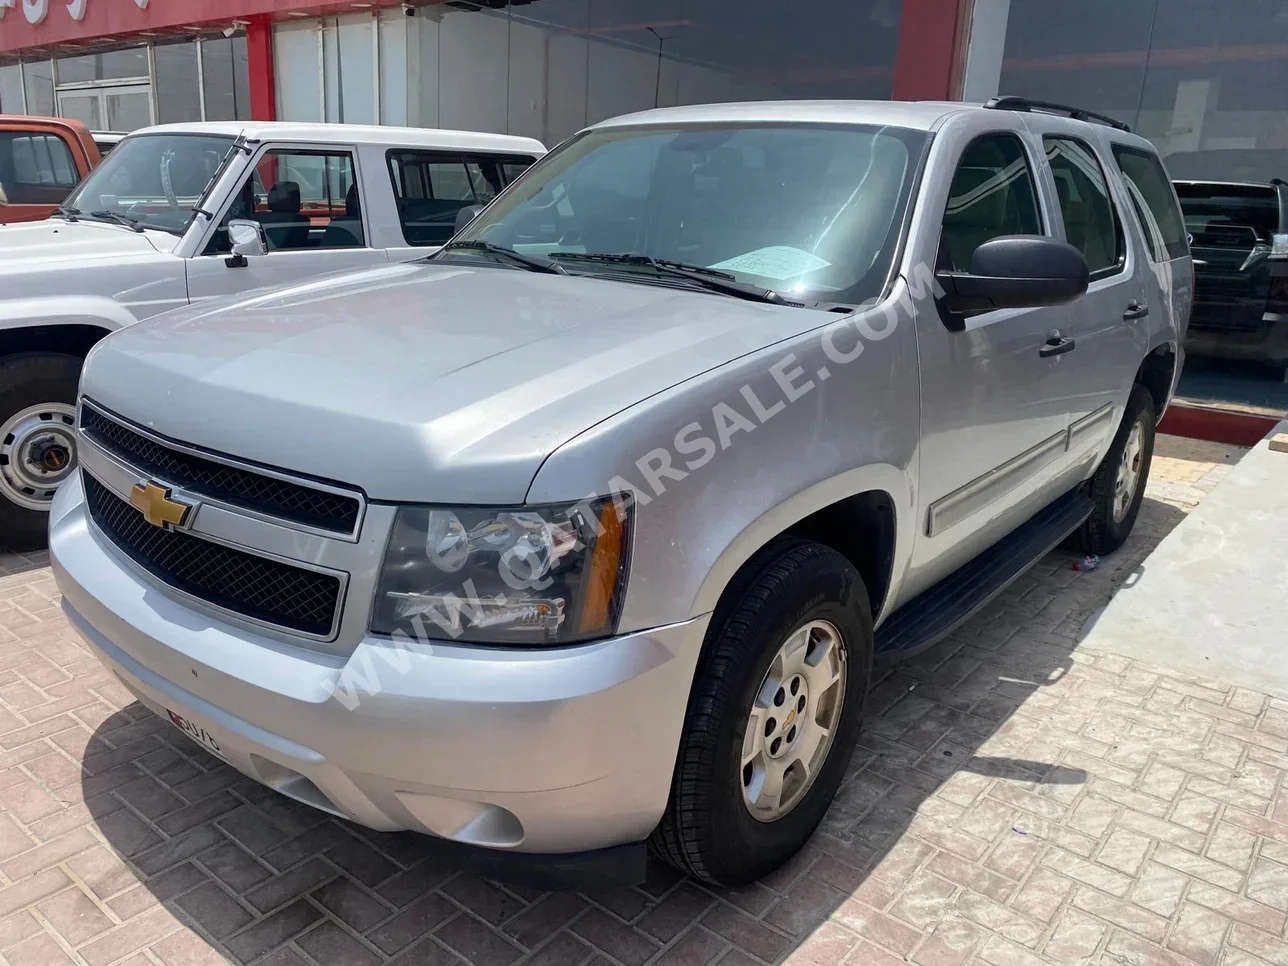 Chevrolet  Tahoe  2012  Automatic  228,000 Km  8 Cylinder  Four Wheel Drive (4WD)  SUV  Silver